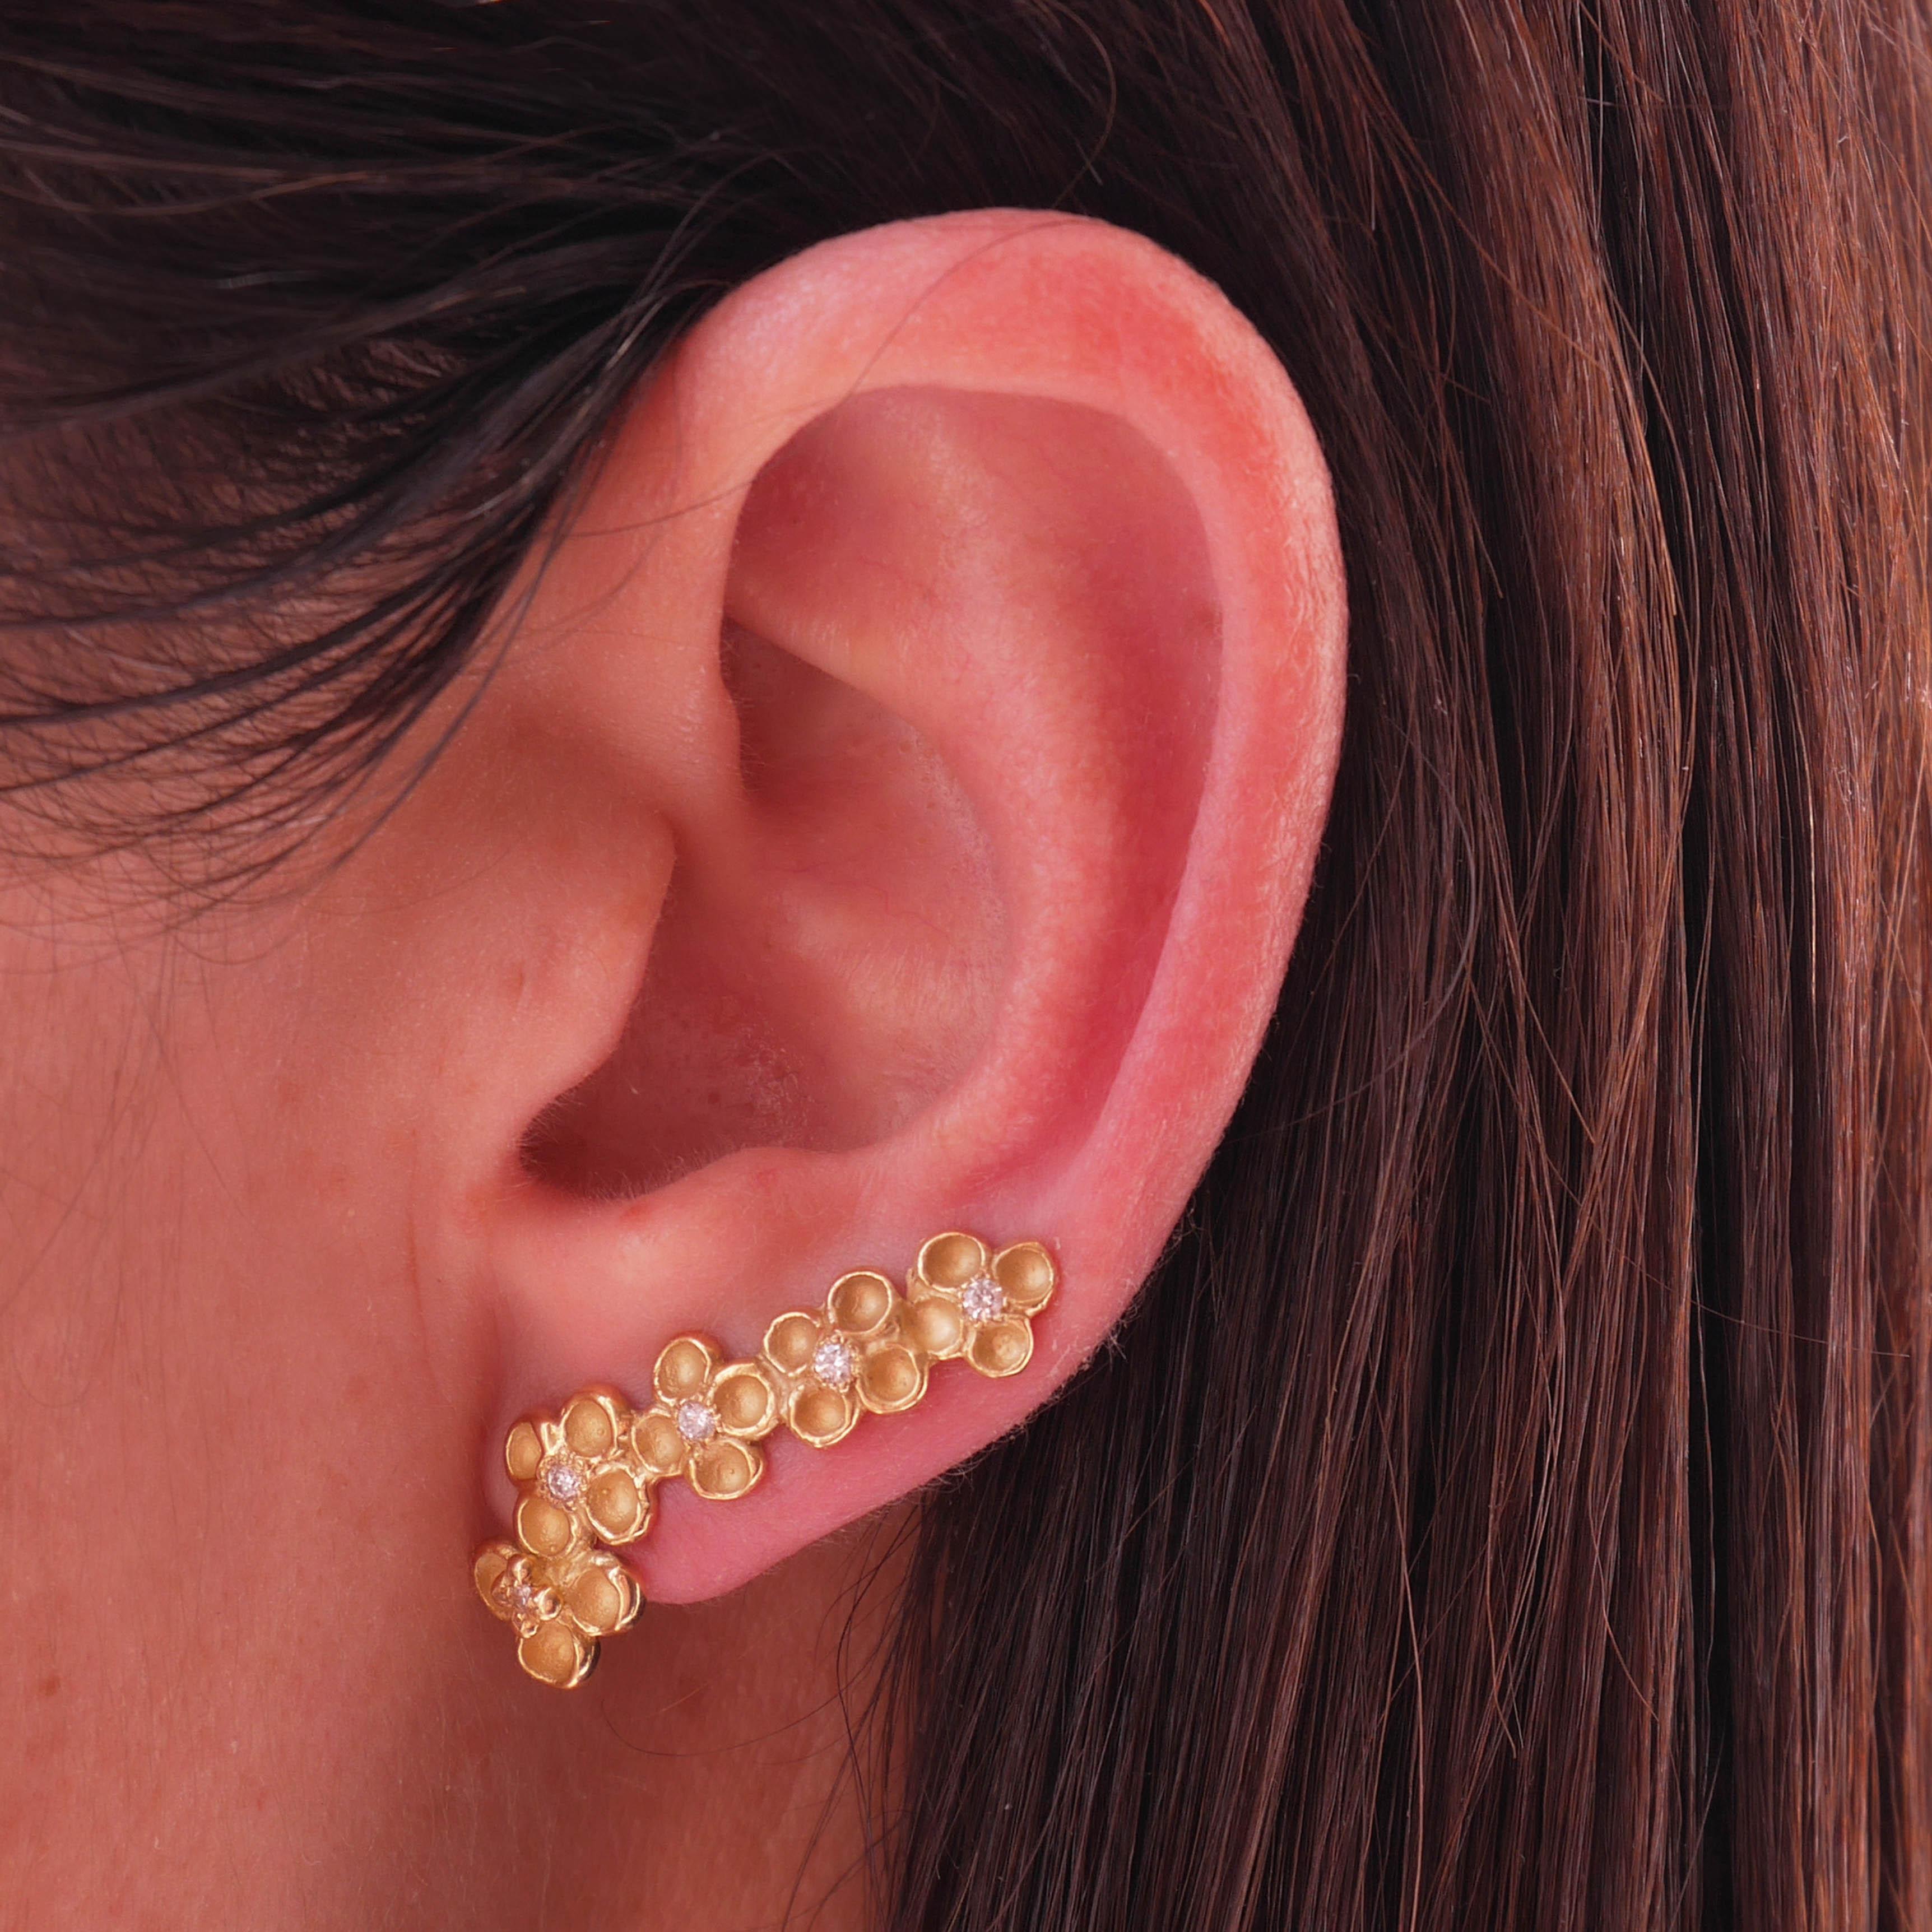 Clusters of contrasting sculpted flowers make up these one-of-a-kind ear climbers creating the illusion of multiple piercings. Perfectly crafted to follow the curve along with the cartilage, they are made in 18 Karat yellow gold app. 5grm. They are